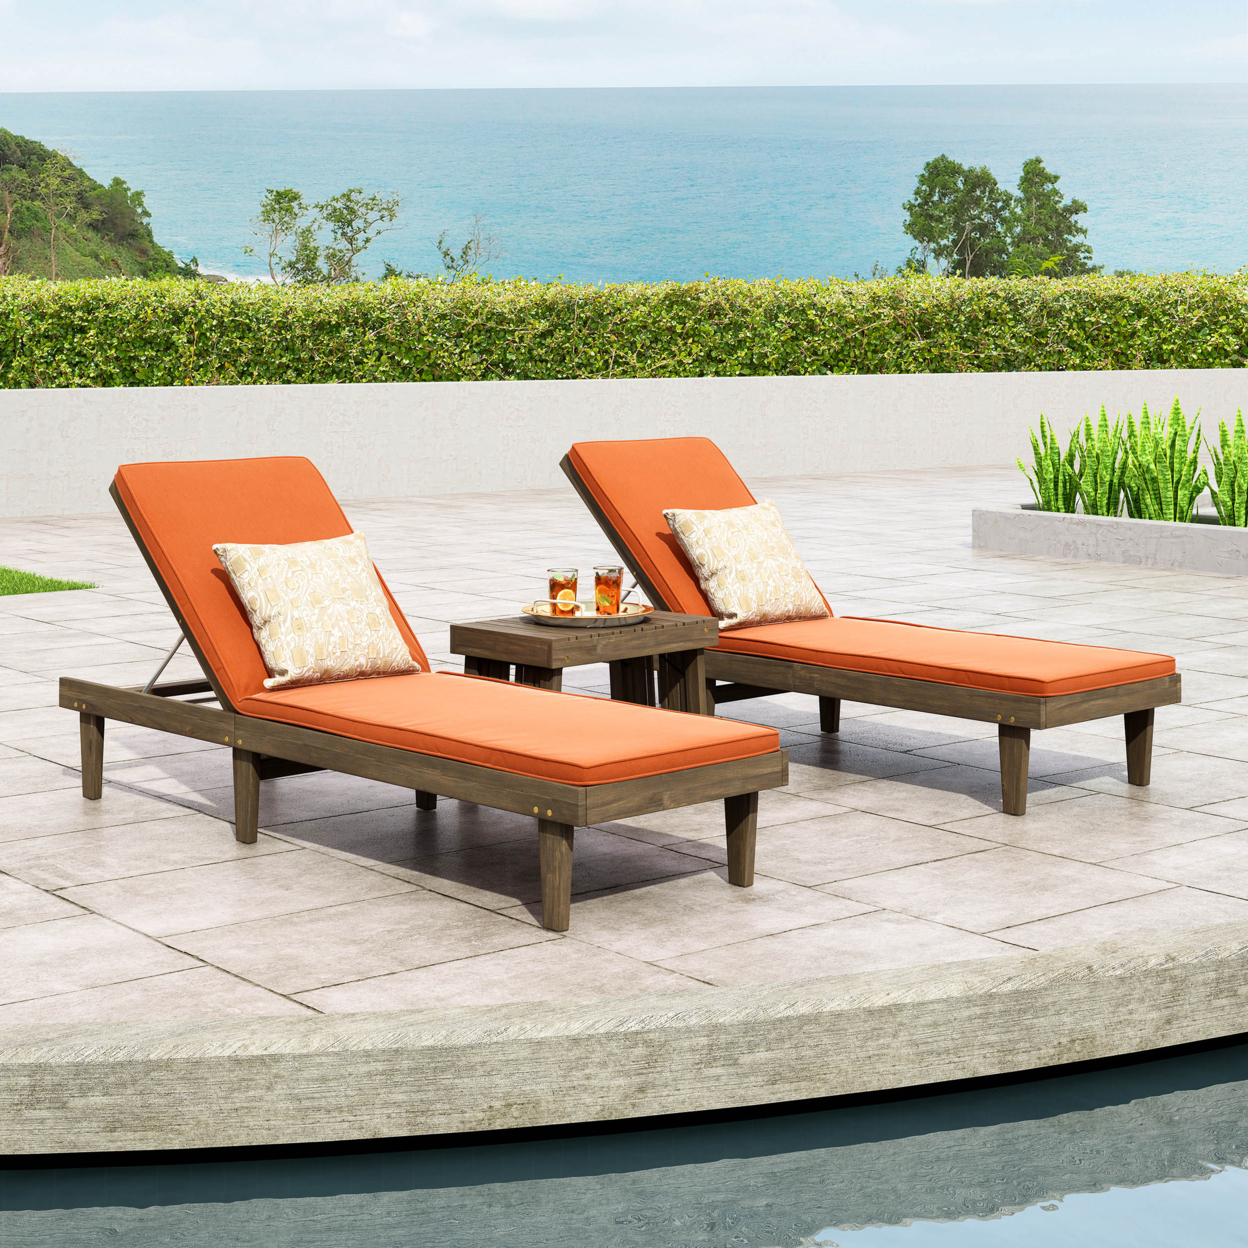 Addisyn Outdoor Acacia Wood 3 Piece Chaise Lounge Set With Water-Resistant Cushions - Gray/rust Orange